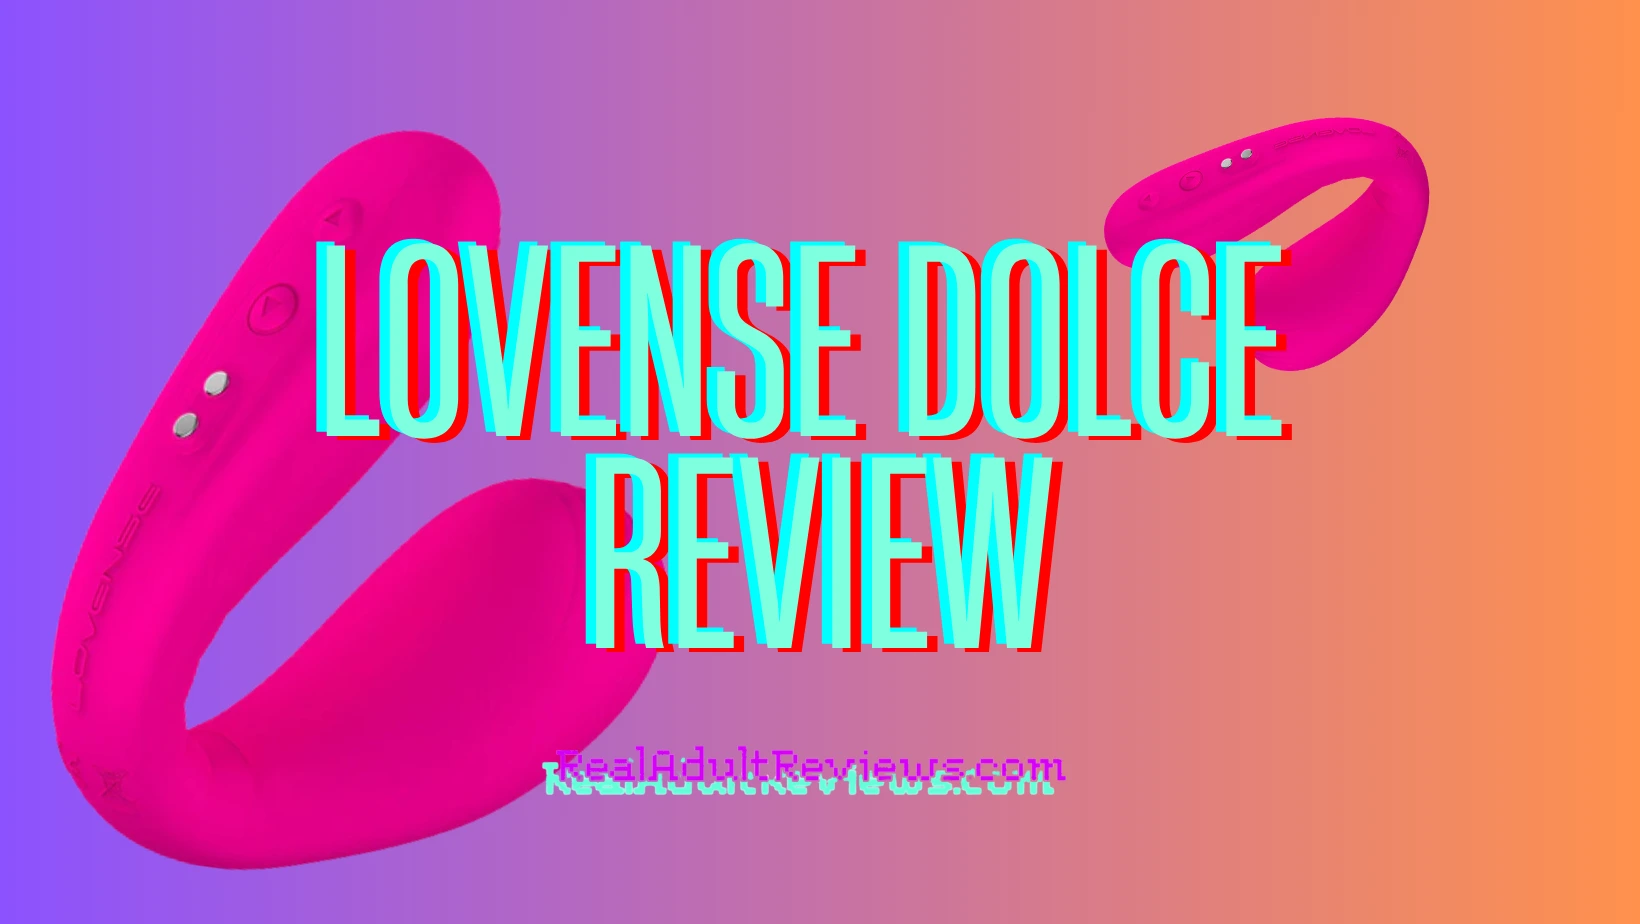 Will You Get Extra Pleasure From the Dual Vibrator? Lovense Dolce Review